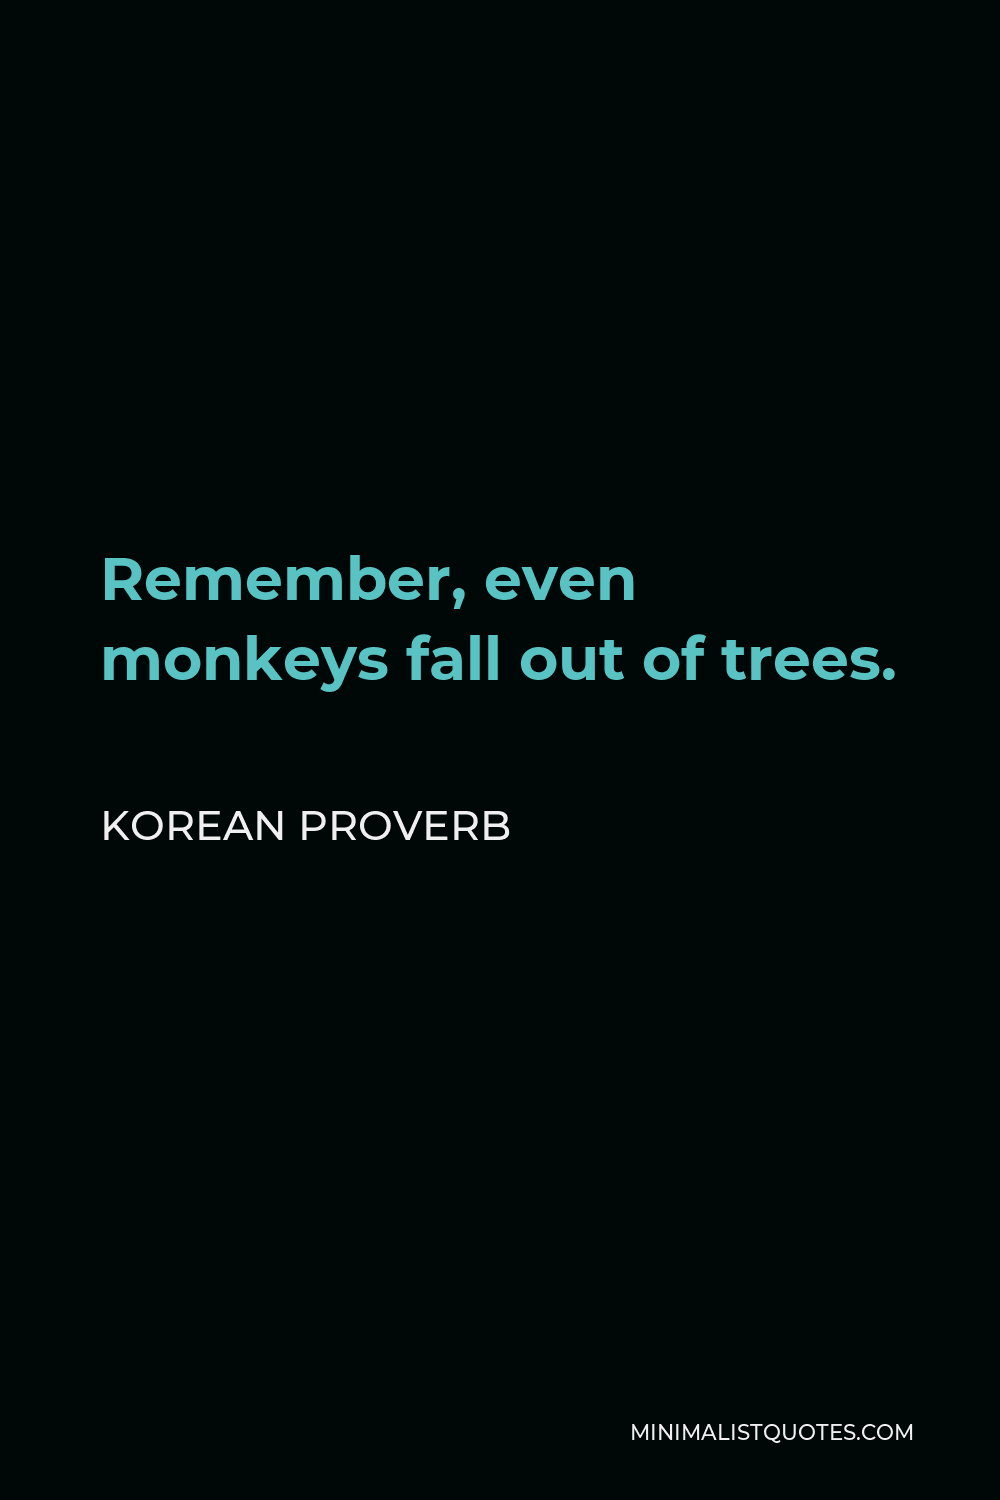 Korean Proverb Quote - Remember, even monkeys fall out of trees.